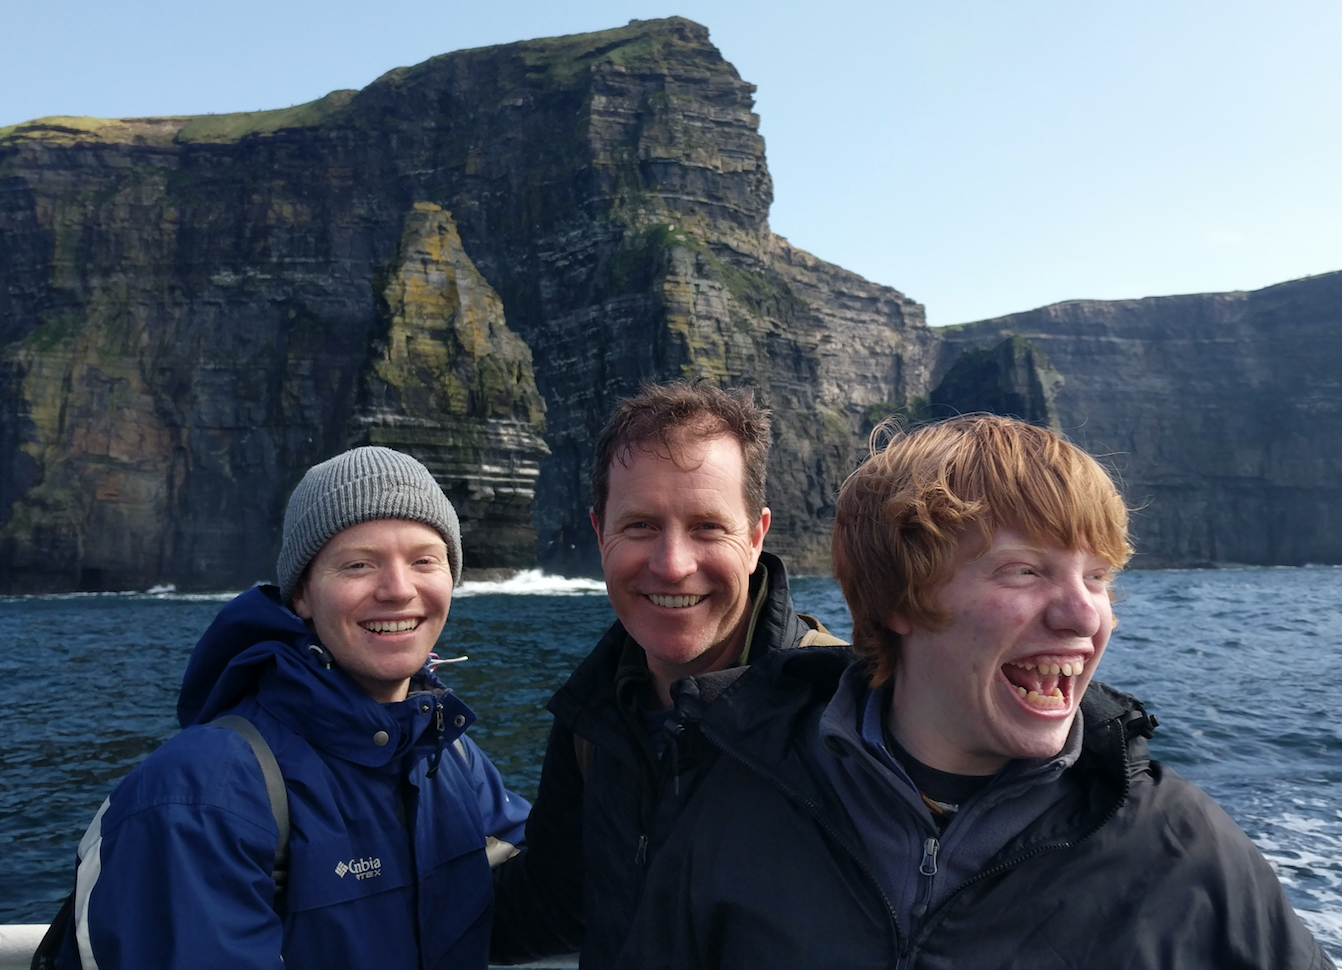 With my sons Matty and Duncan at the Cliffs of Moher, County Clare, Ireland